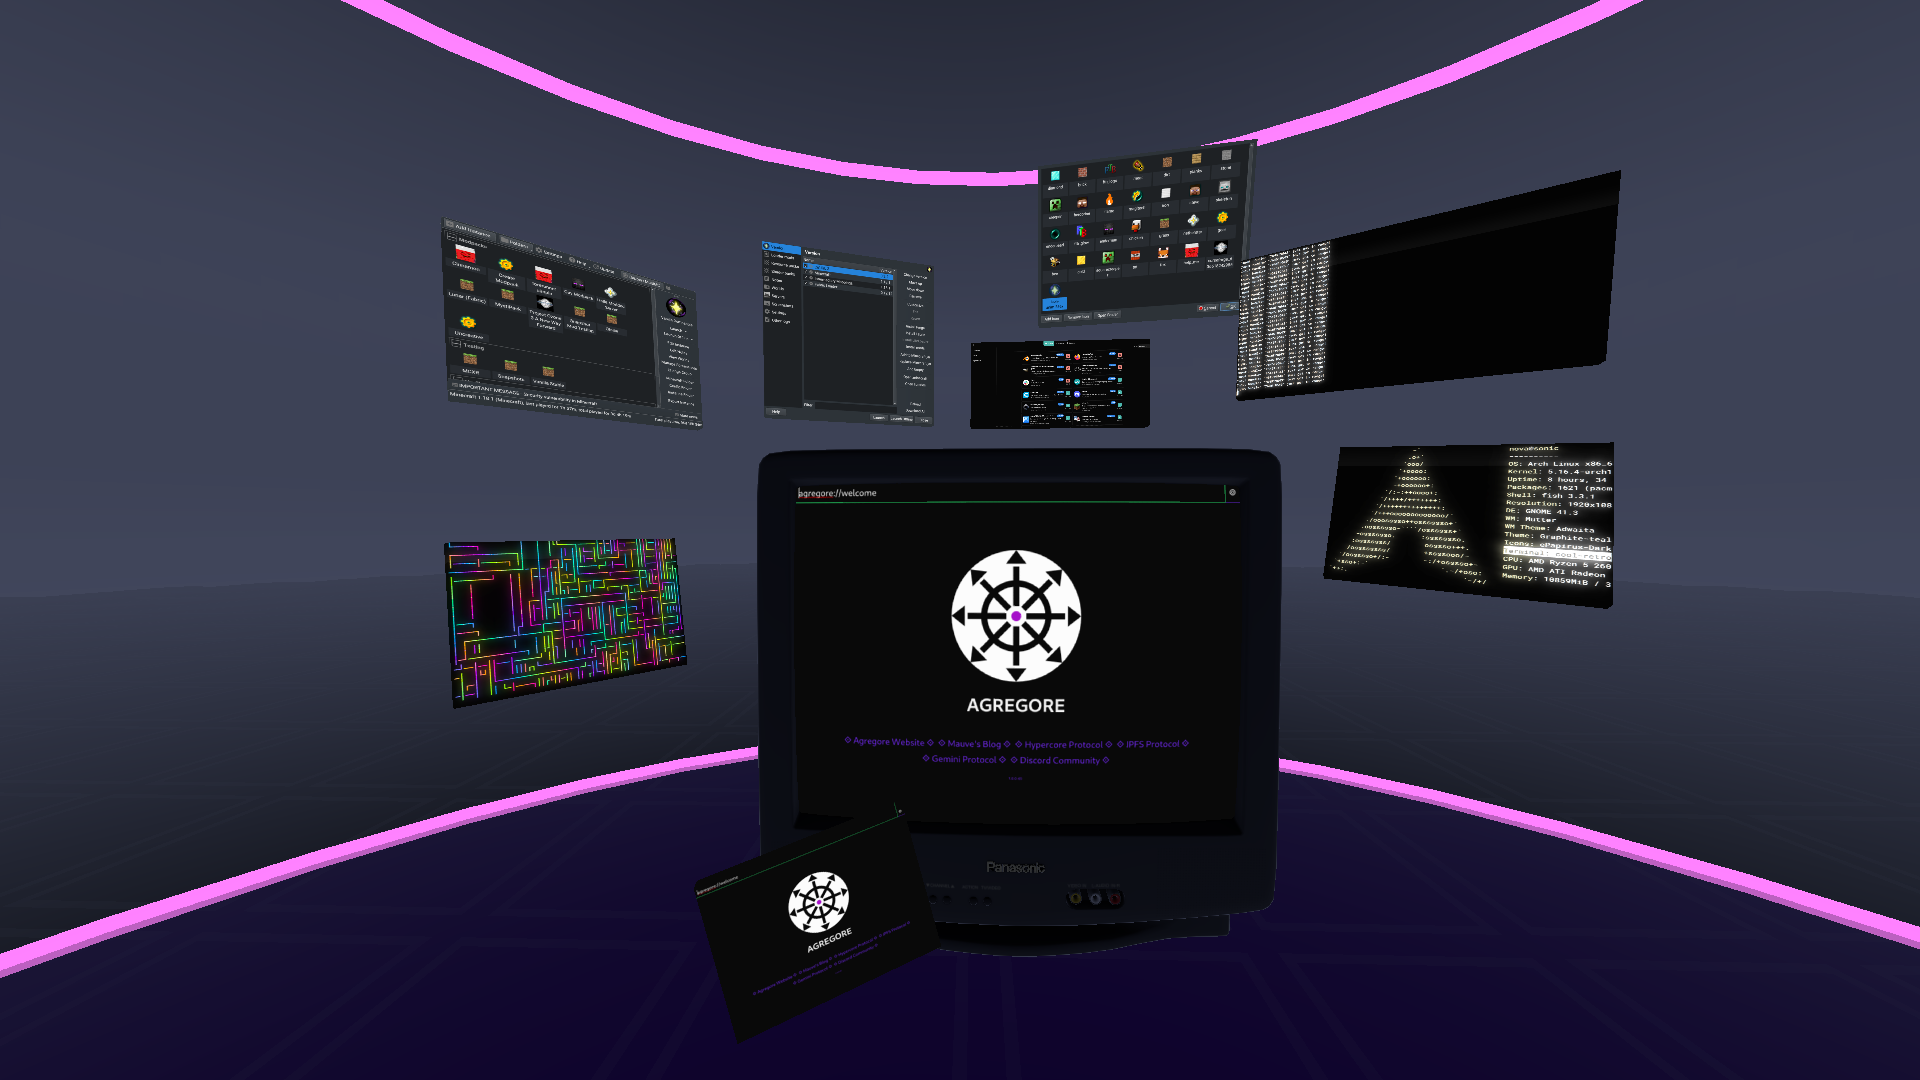 A series of application windows as 3D panels similar to small wooden boards in proportions with a Panasonic CRT TV model in the center showing Agregore (the browser).